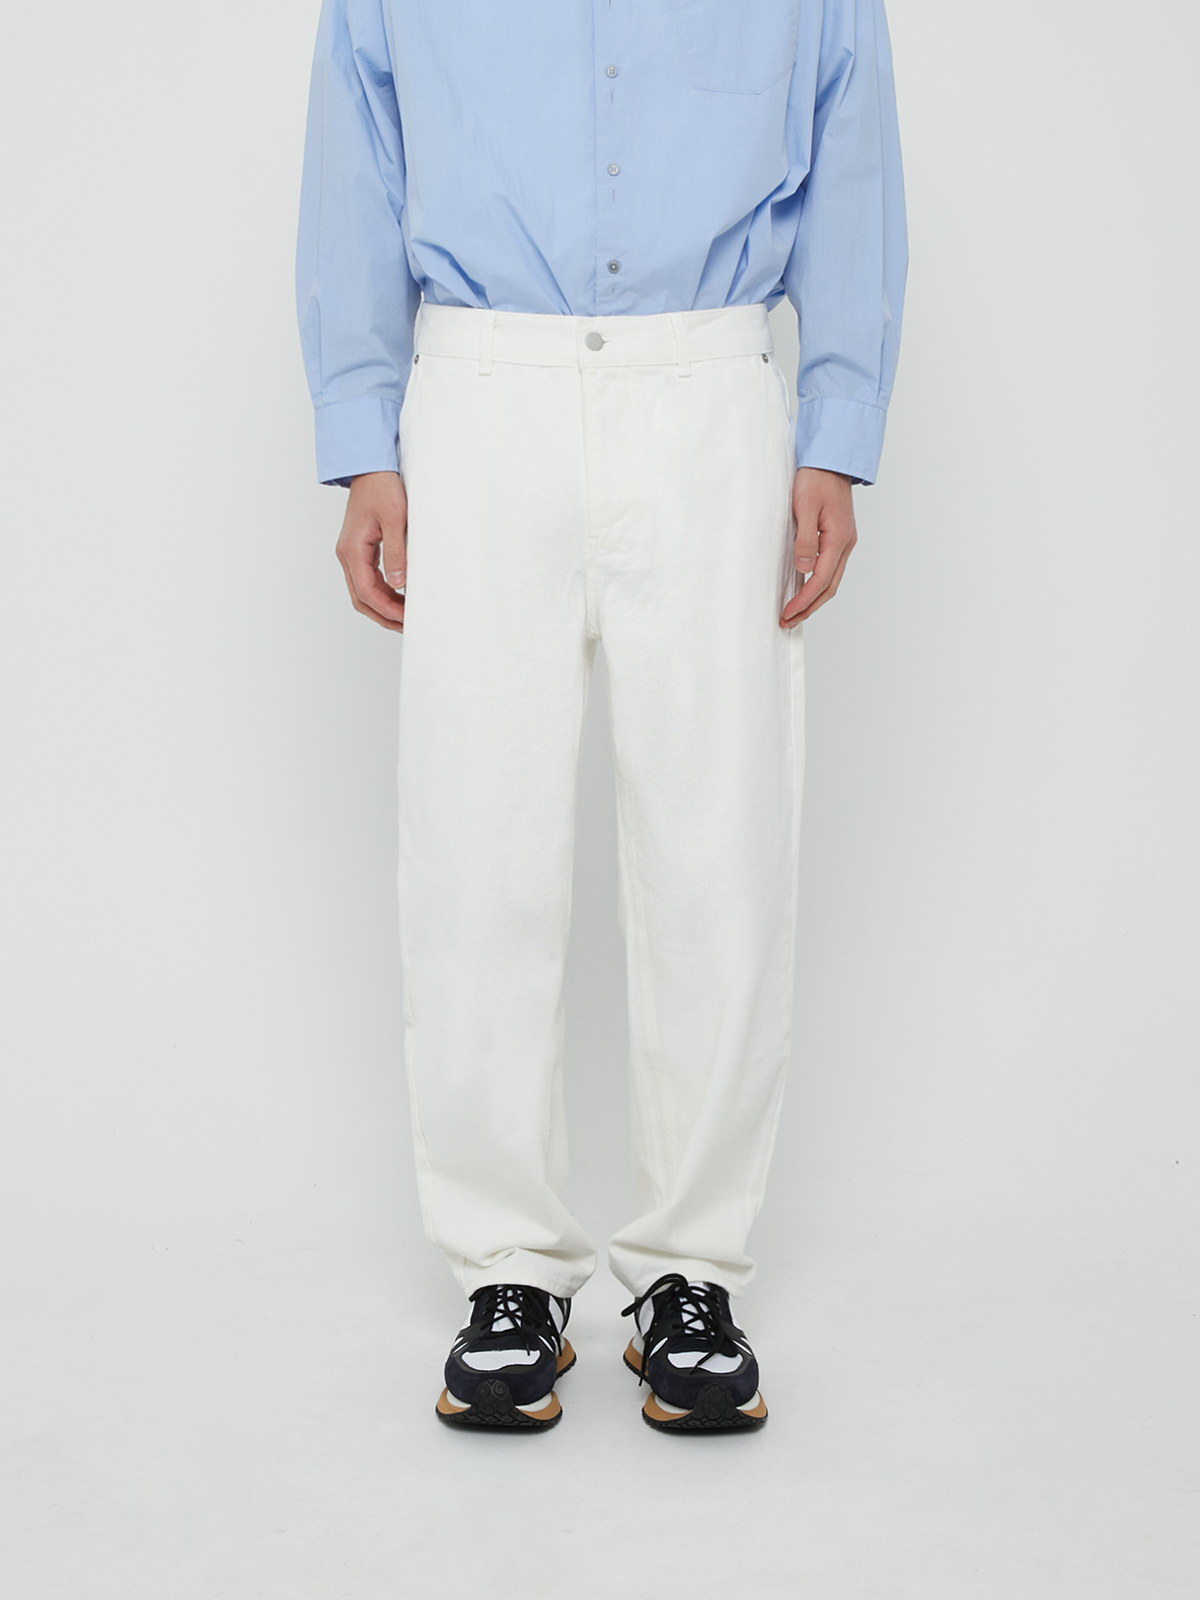 COMFORT TWILL PANTS (OFF WHITE)